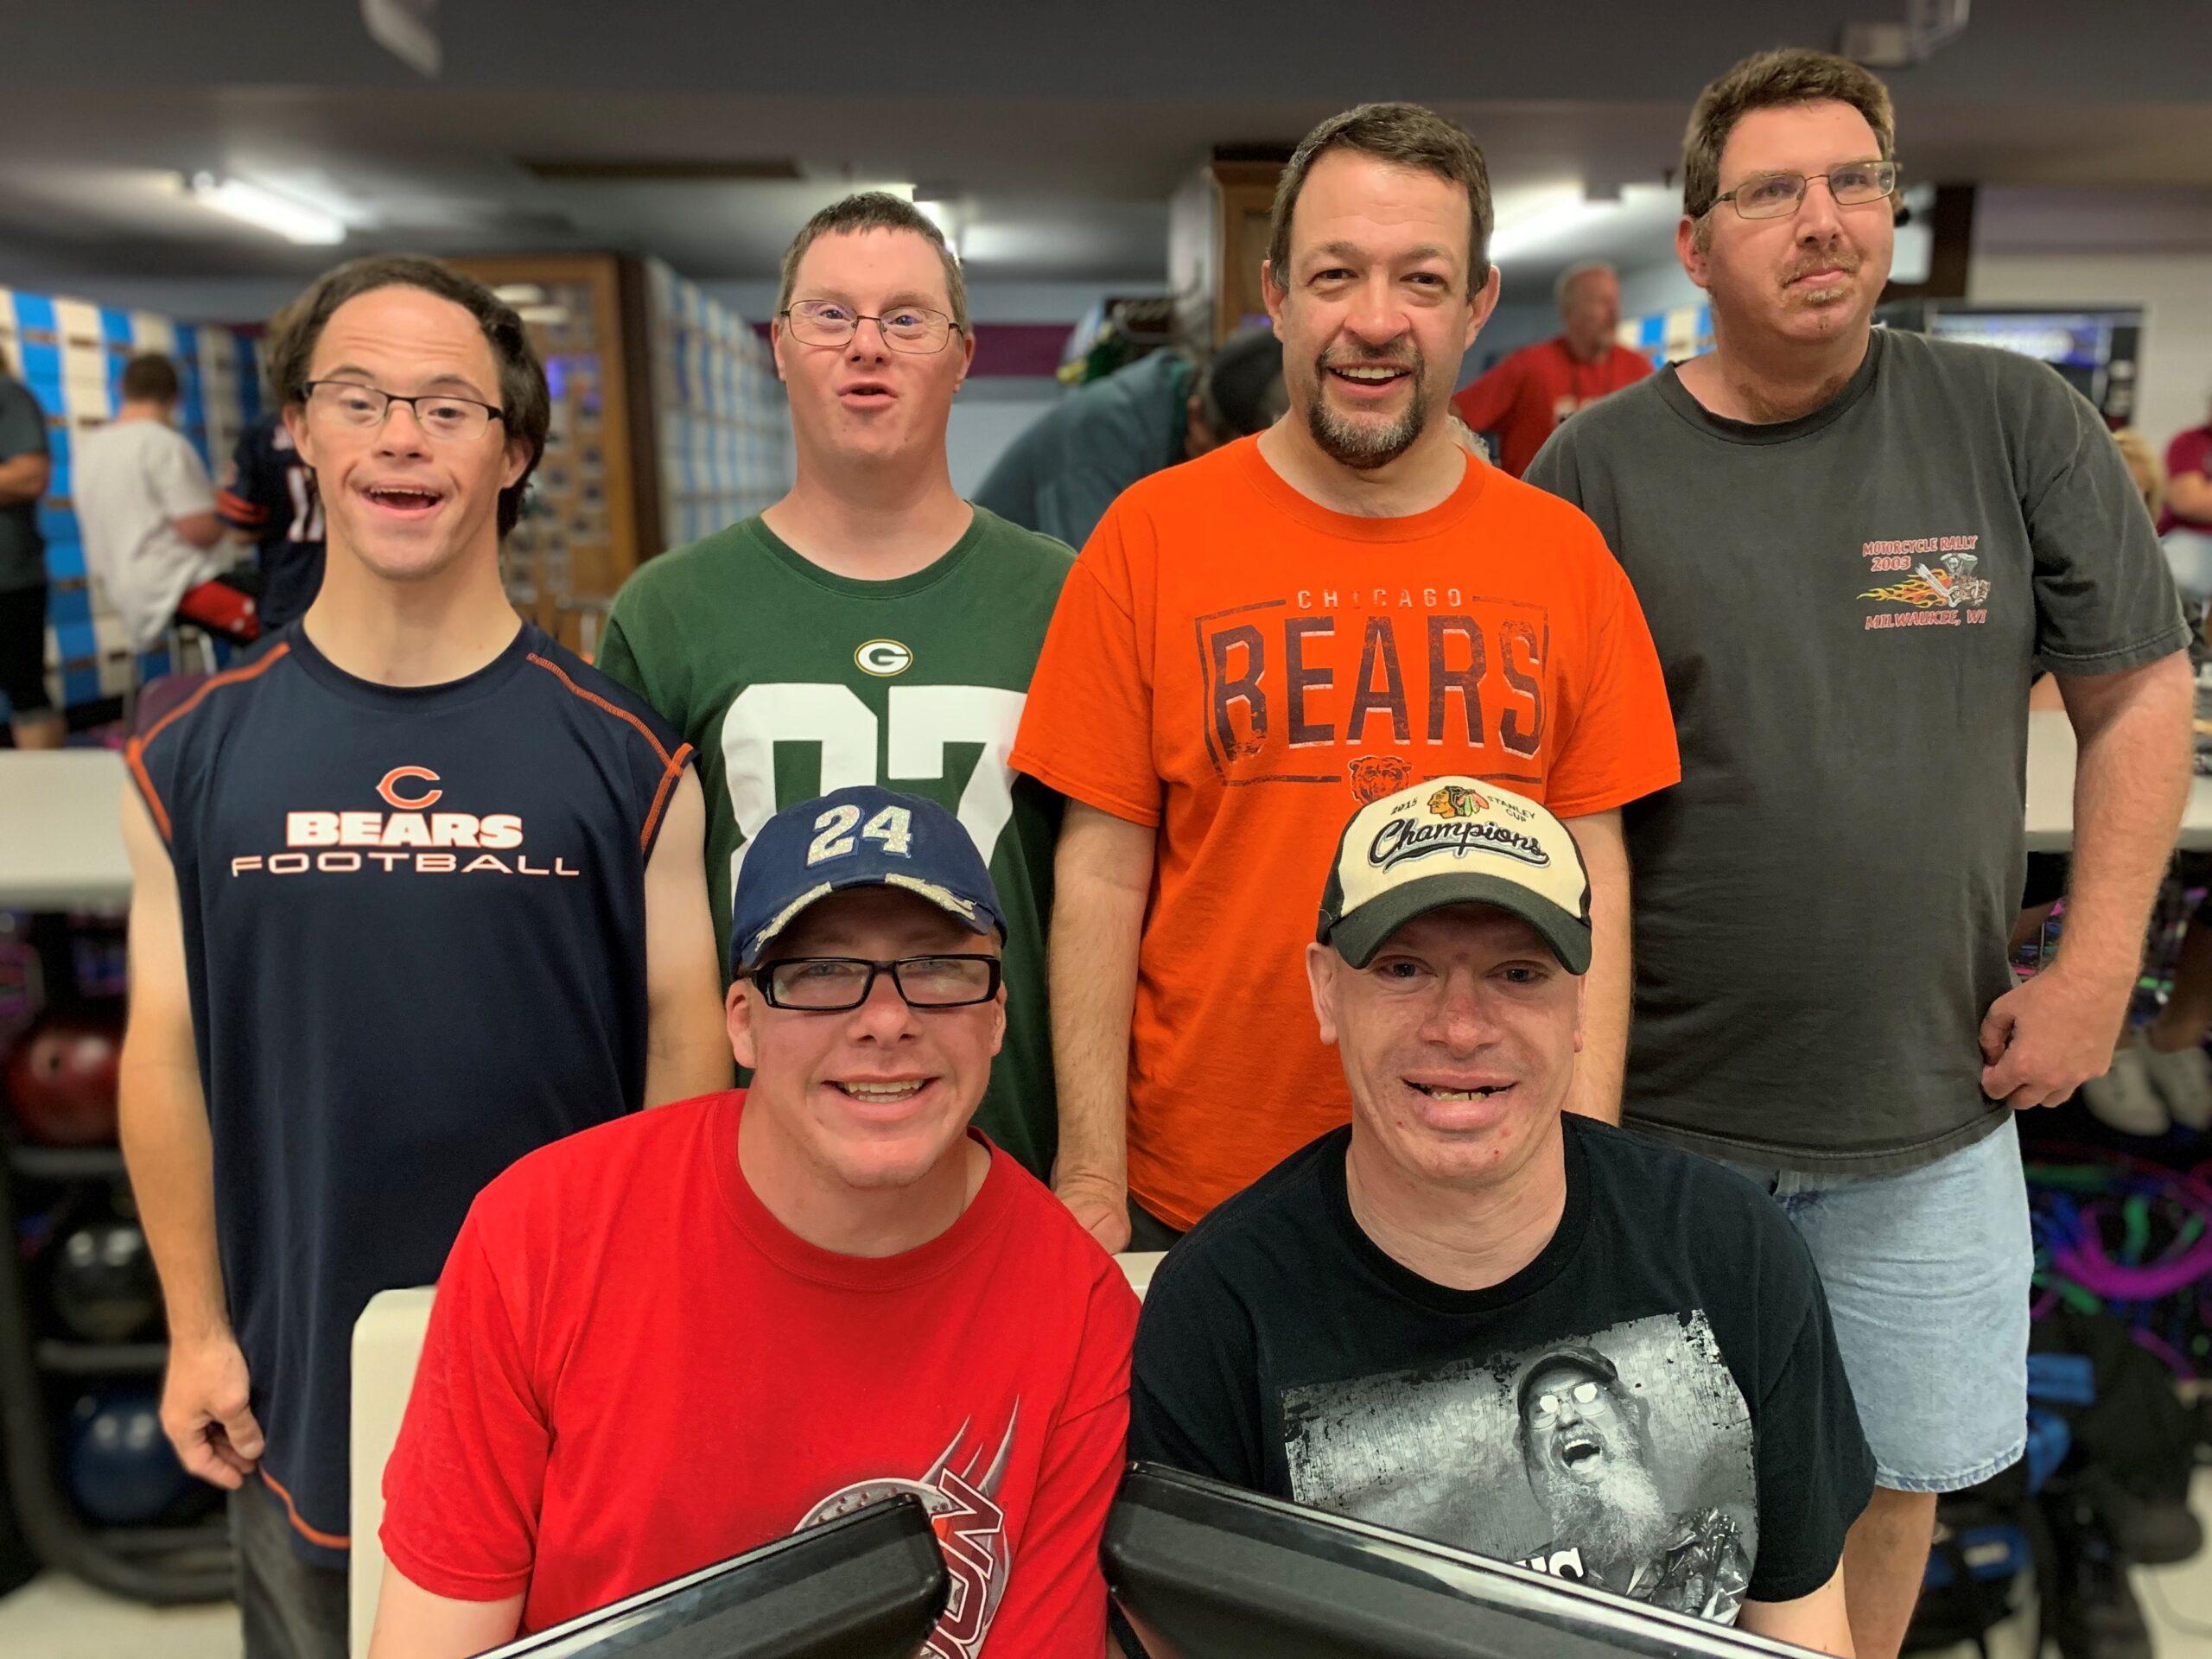 Six men smile and pose together at a bowling alley. Two of them are sitting down and the rest are standing behind them. There are bowling balls and several other people in the background.